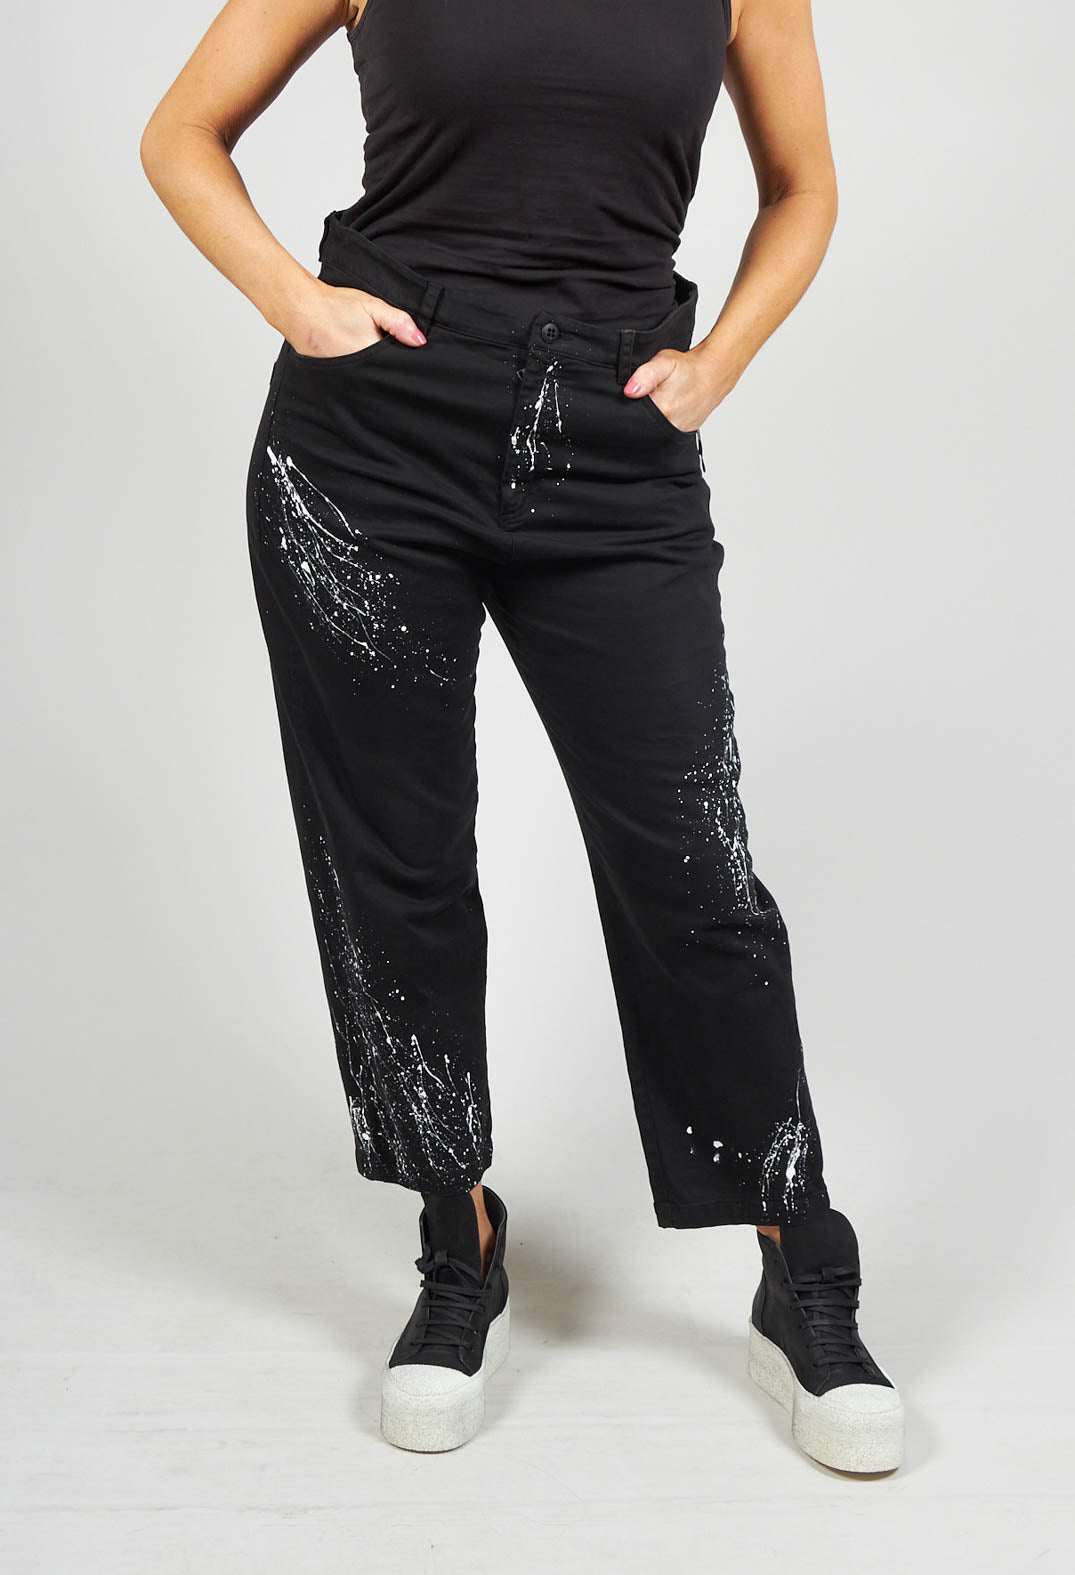 Denim Jeans with Contrasting Paint Detail in Black